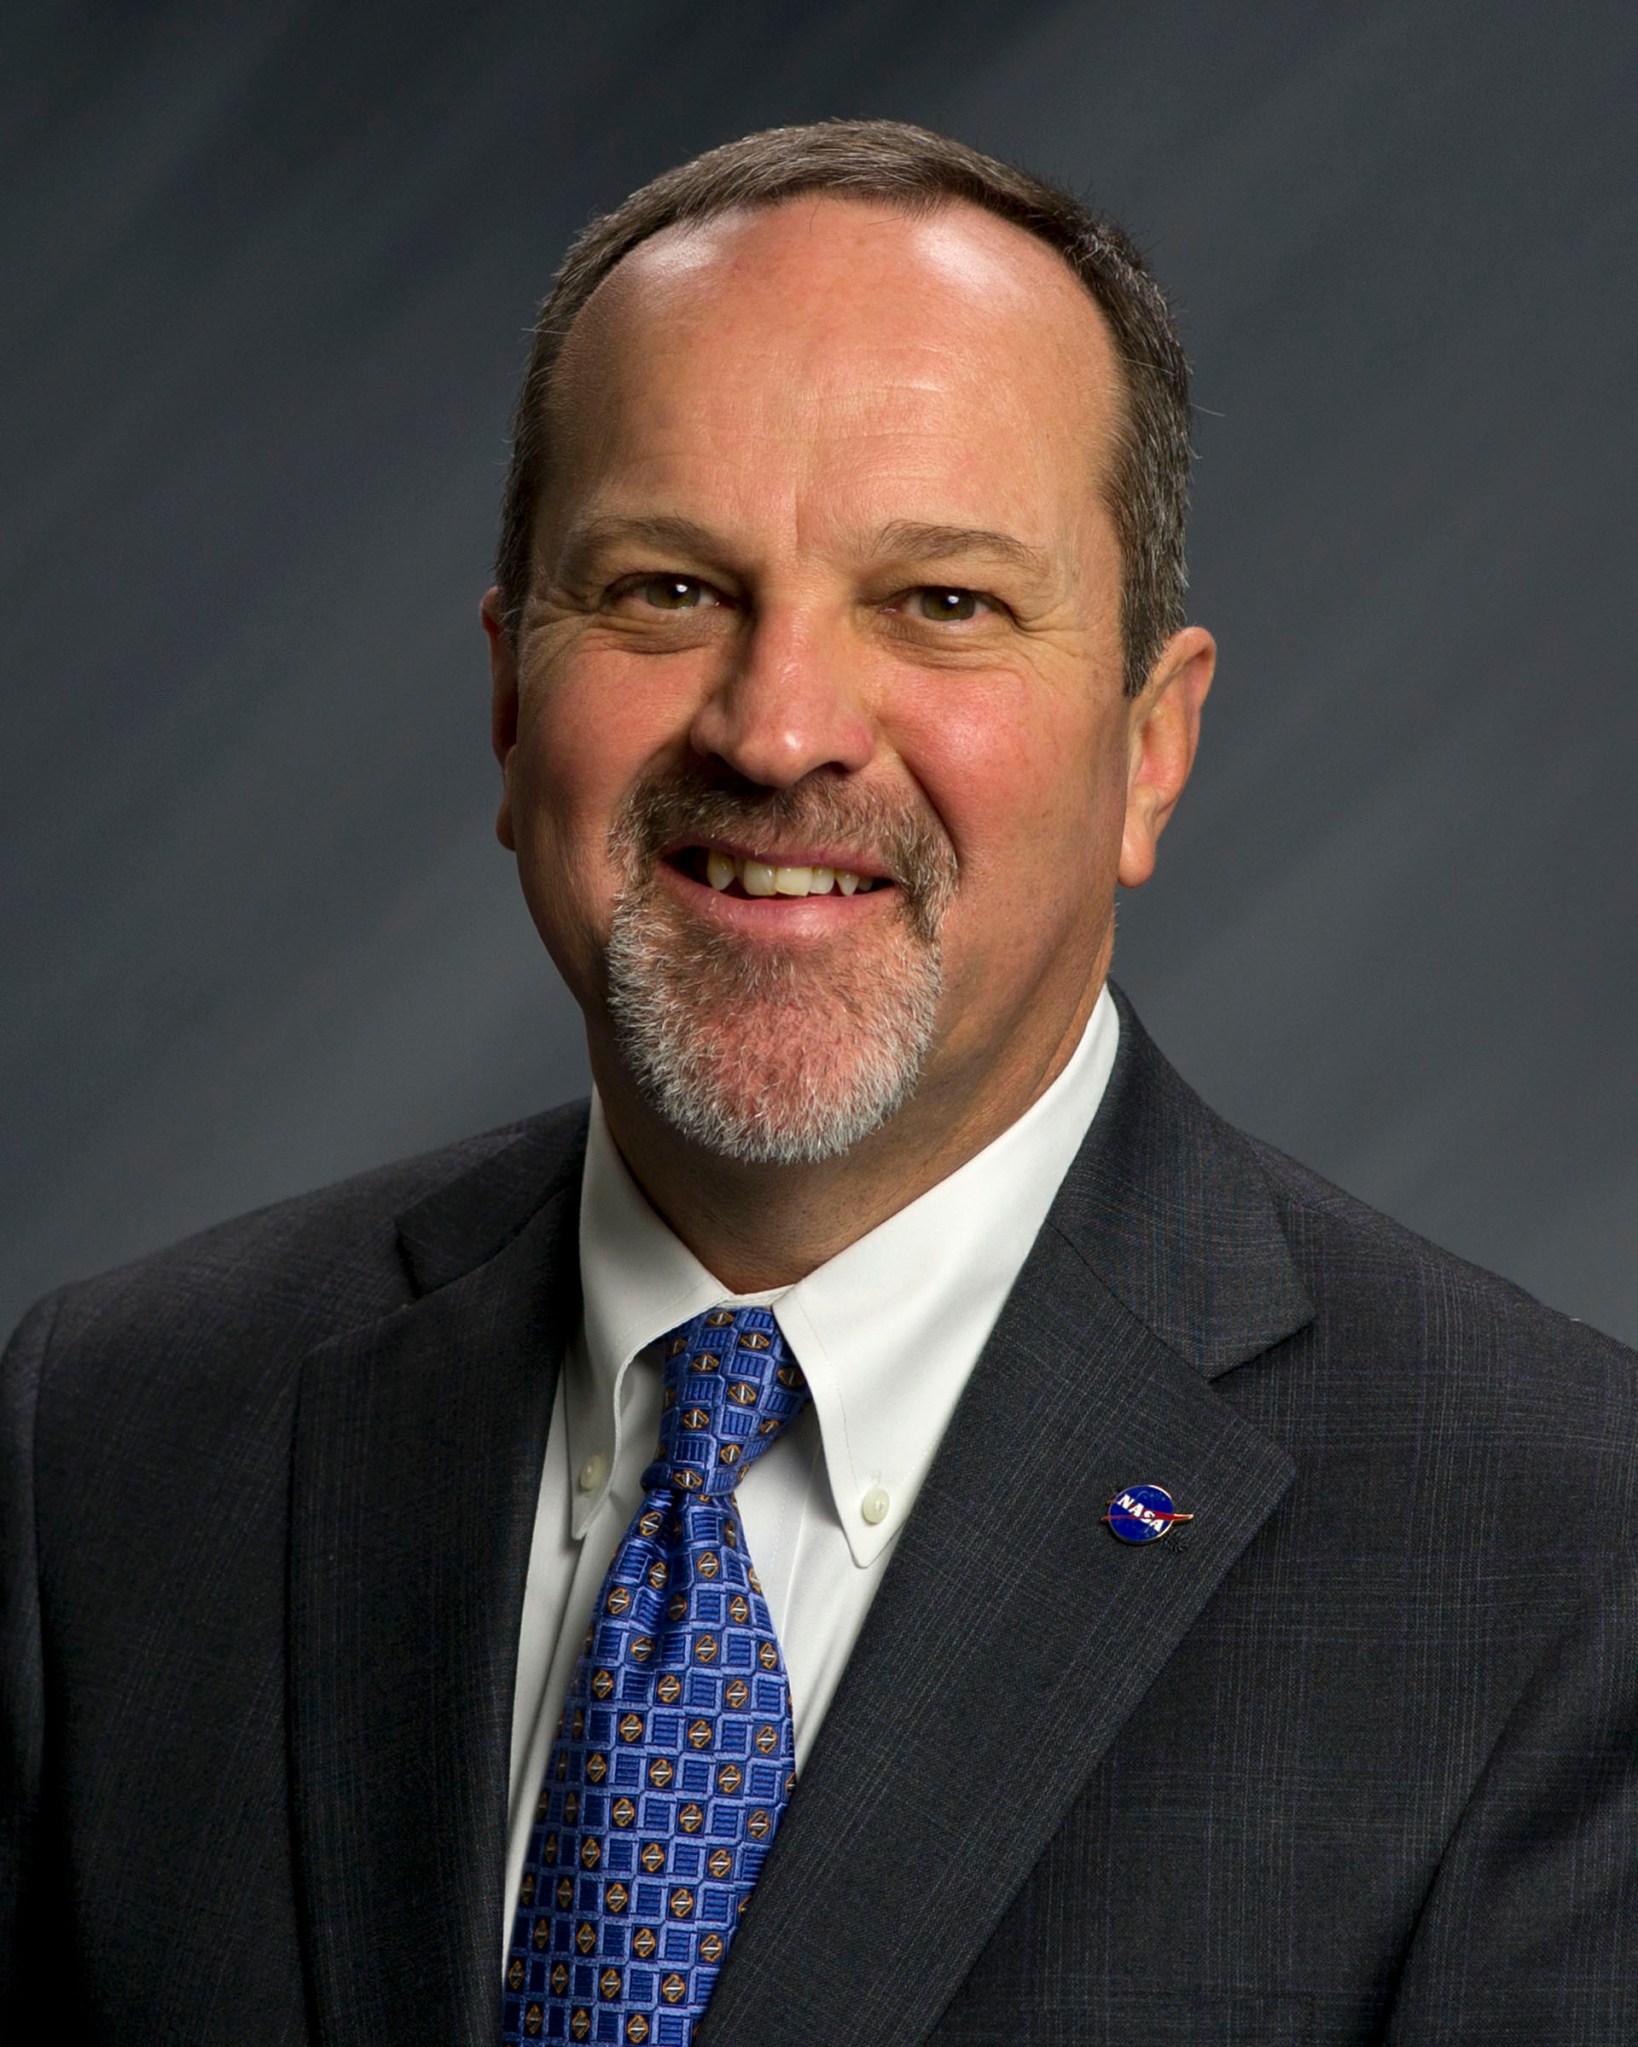 Jerry Cook has been named deputy director of NASA’s Space Launch System Program at the agency’s Marshall Space Flight Center.